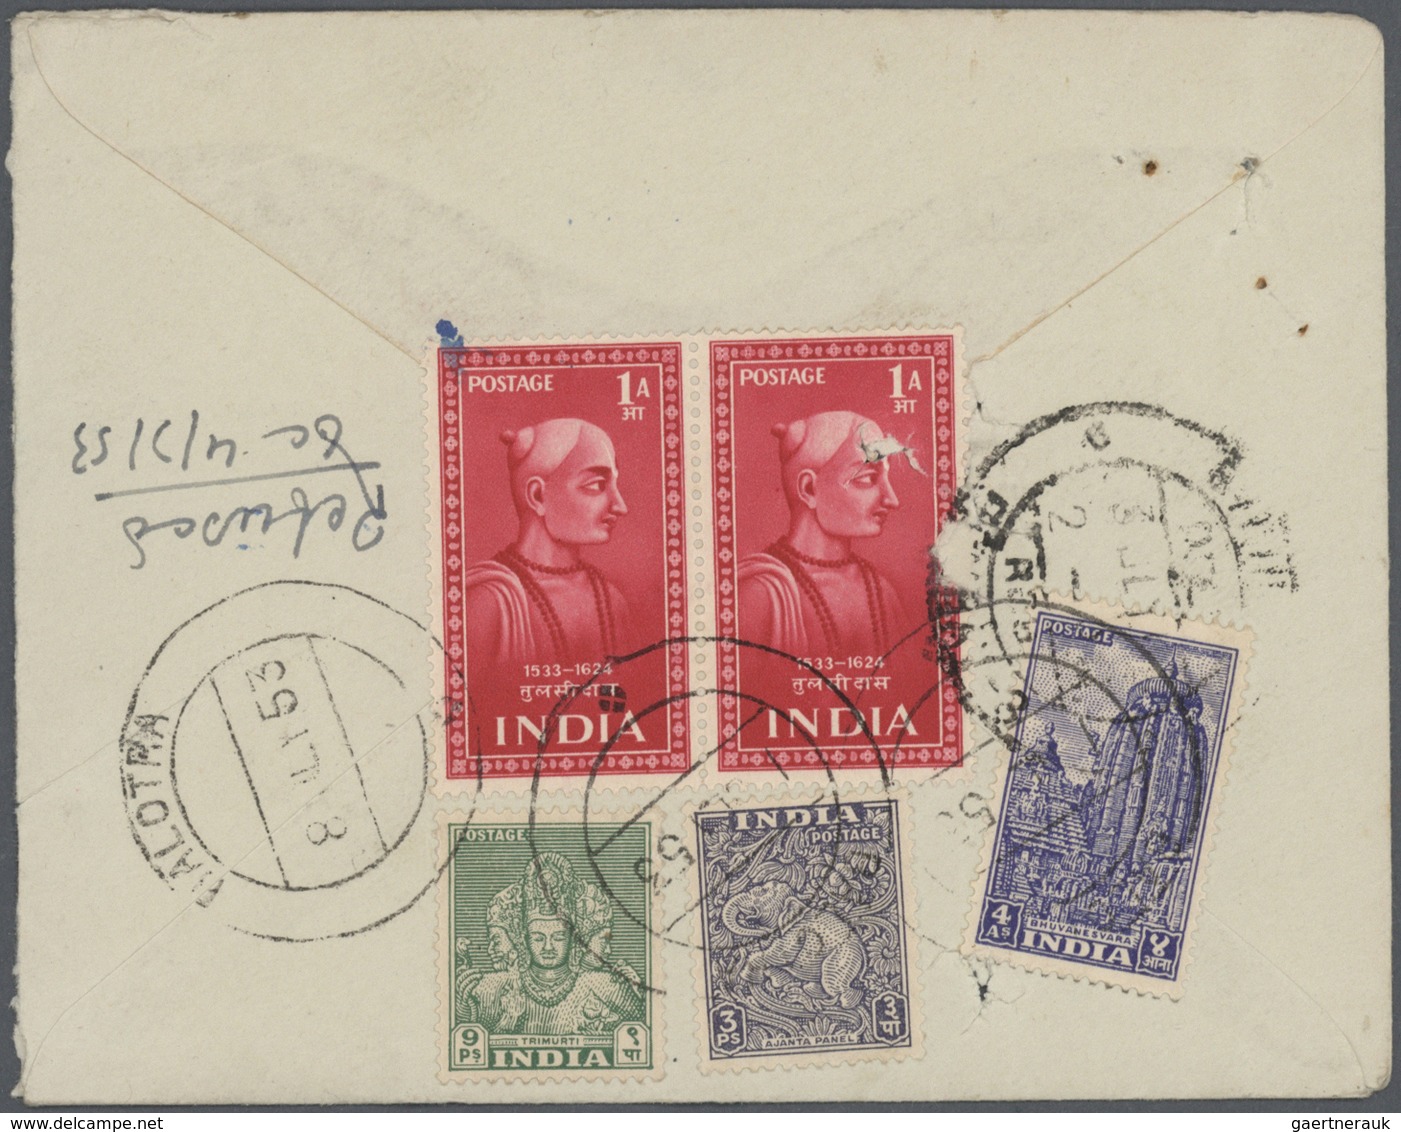 Br/GA Indien: 1947-1970's: Accumulation of more than 500 post-Independence covers, postcards and postal st